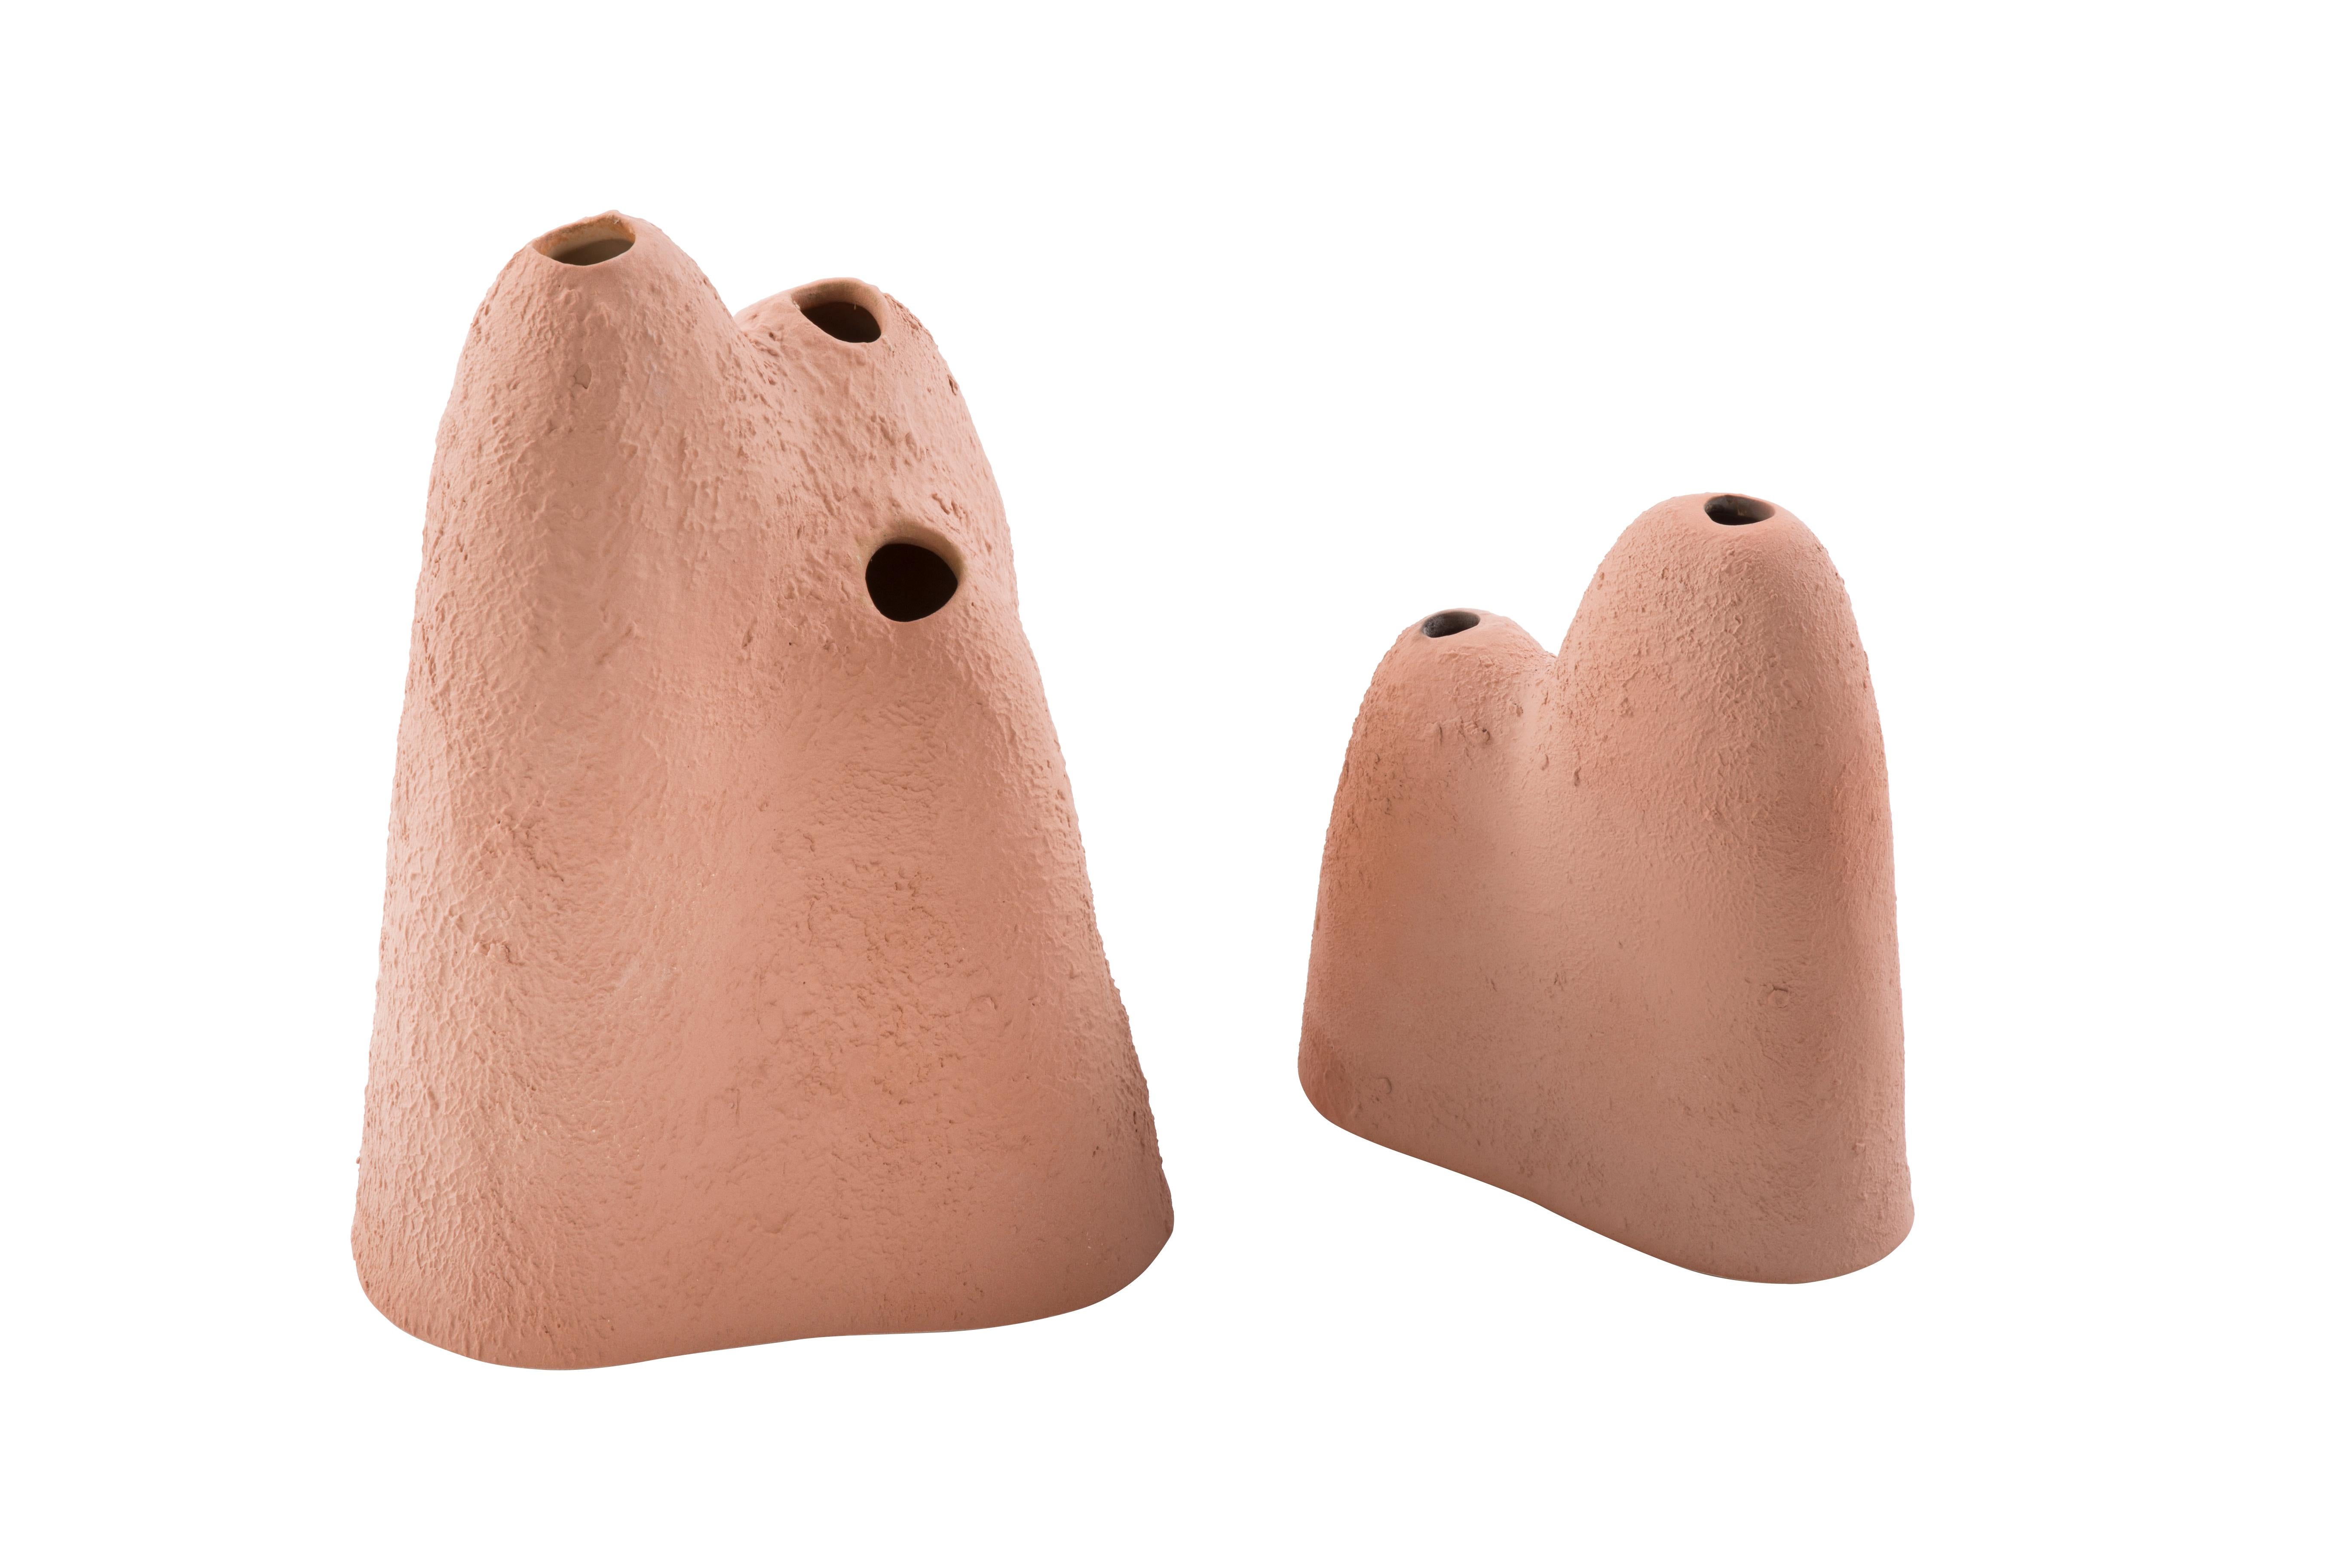 Set of 2 Mountain Vases by Pulpo
Dimensions: D25 x W20 x H31 cm / D21 x W9 x H22 cm
Materials: ceramic

Also available in different colours. Please contact us.

Making a dramatic entrance overtop your tablescape below comes the mountain vase. Its